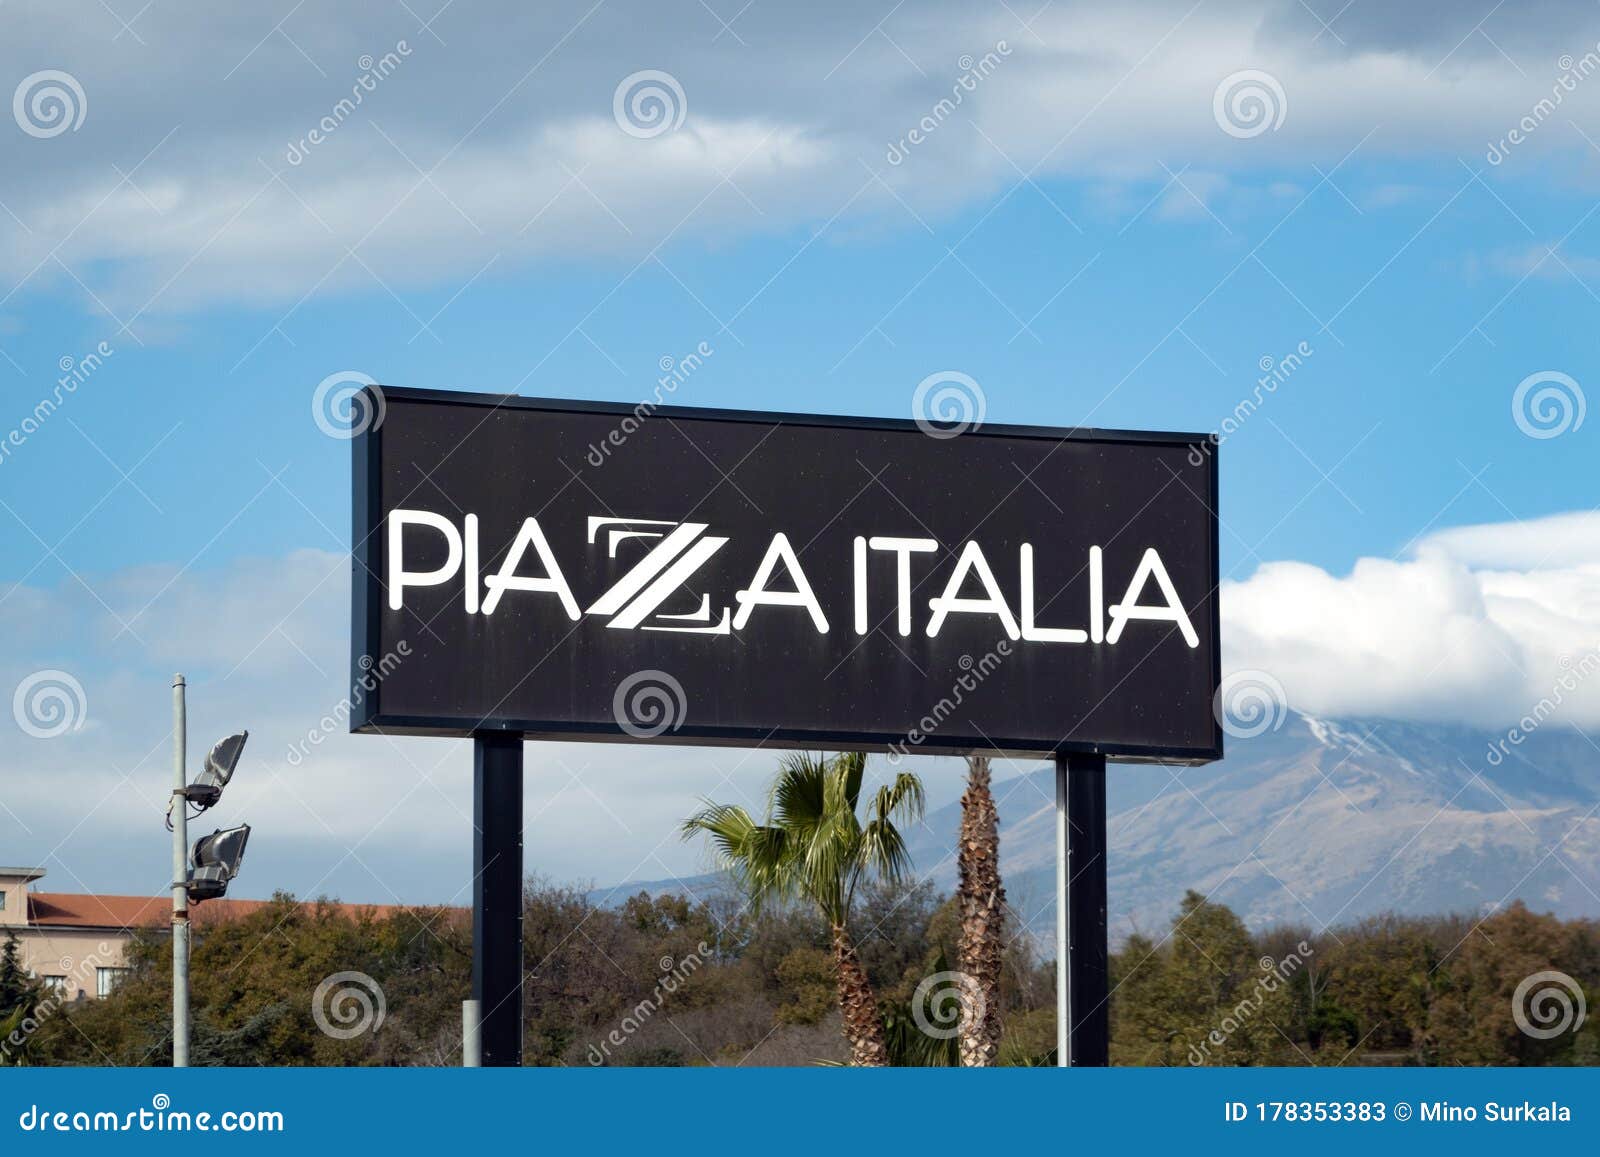 The Banner of the Piazza Italia Fashion Company Which Sells